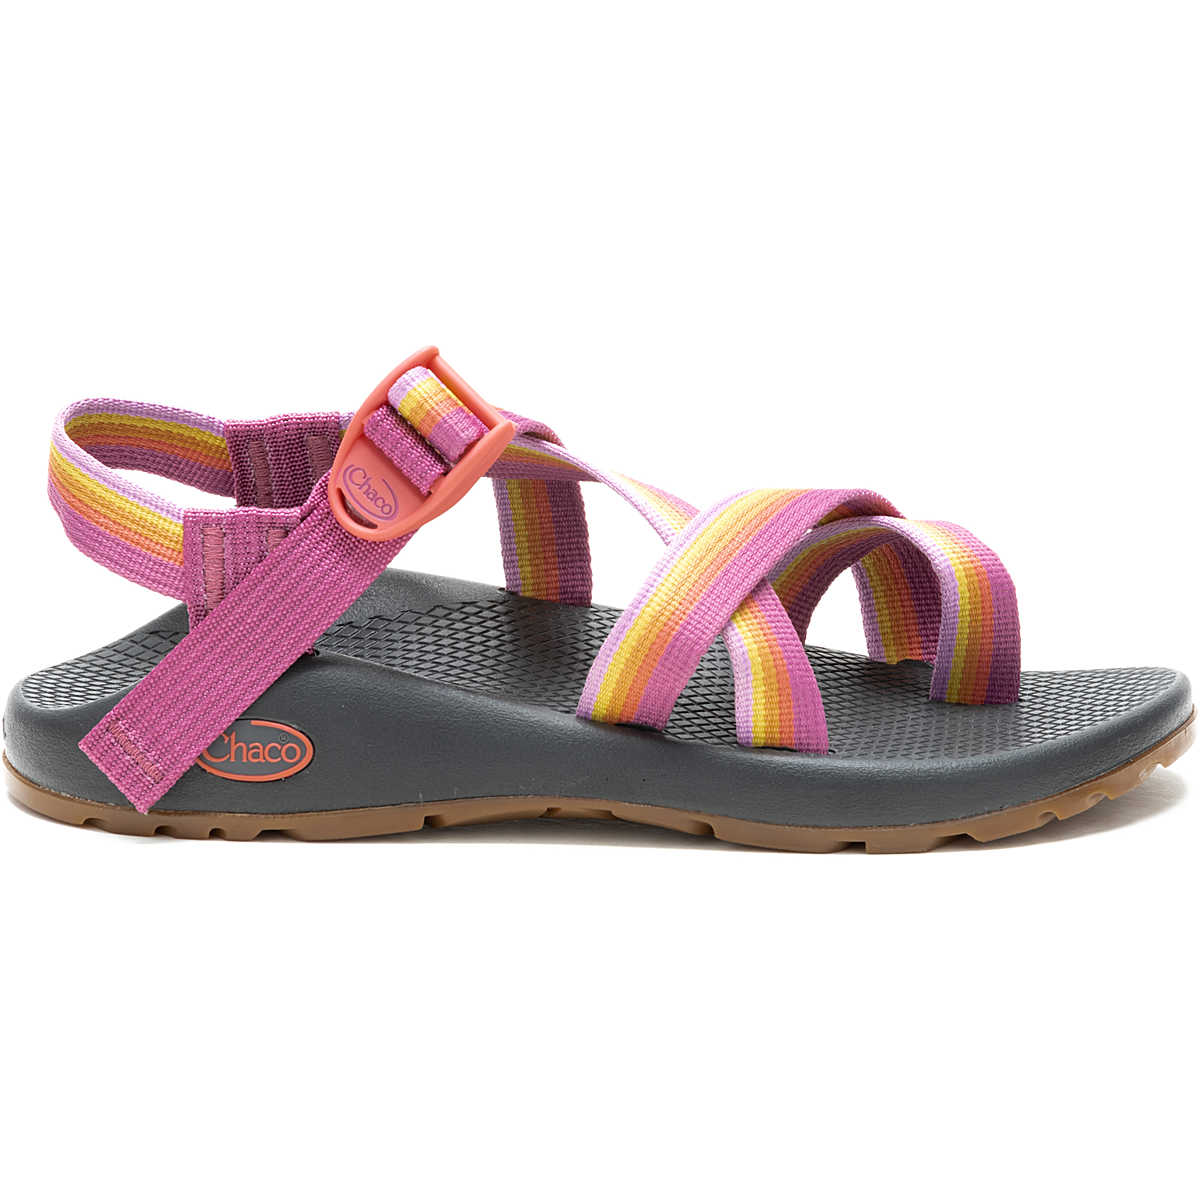 Z/2 Classic Sandals for Women